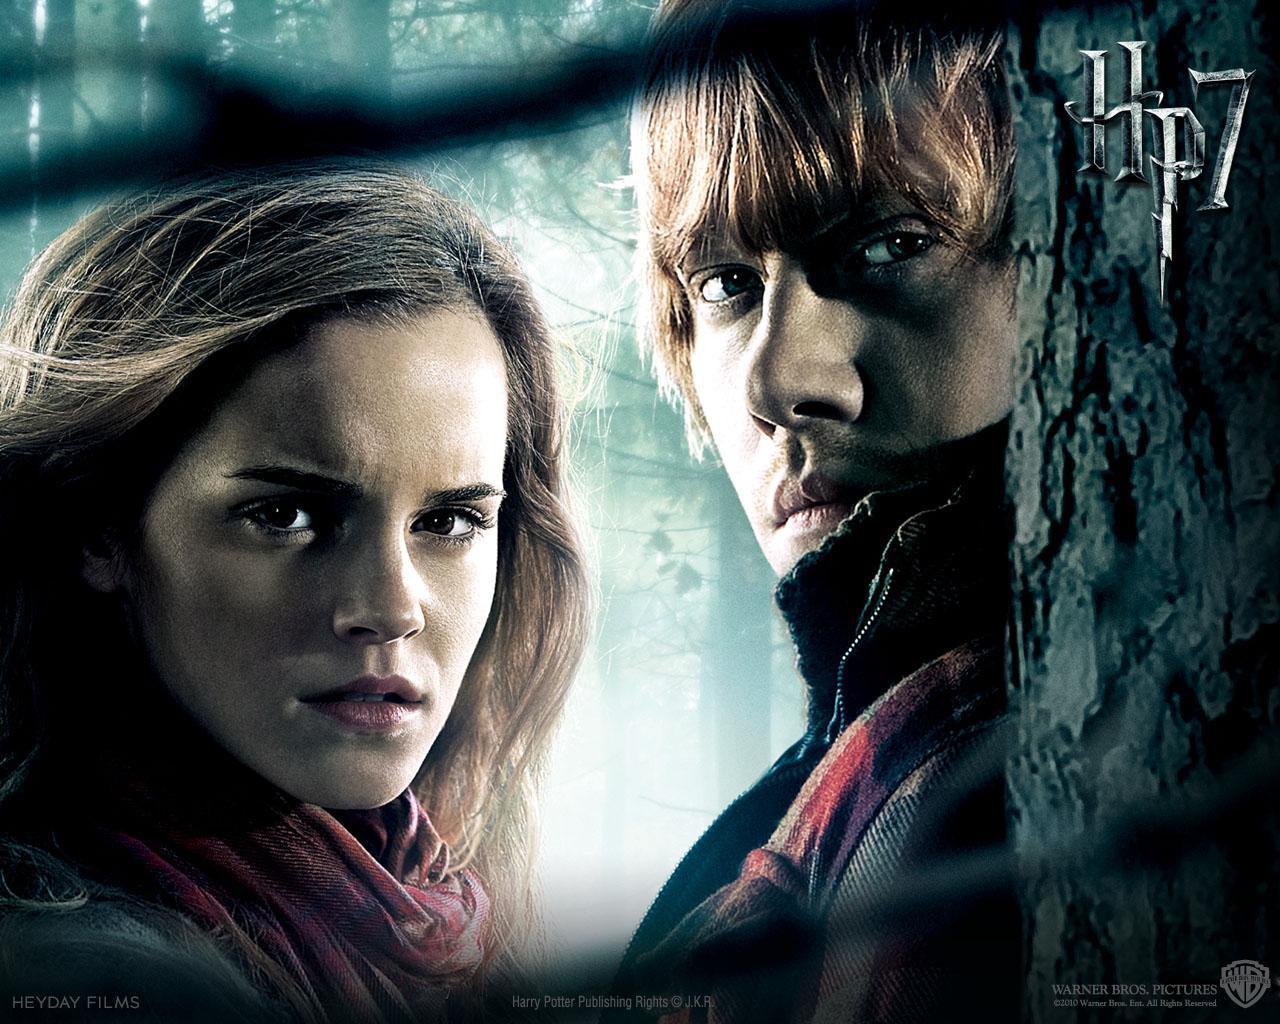 Image Official Hermione And Ron HD Wallpaper Background Photos